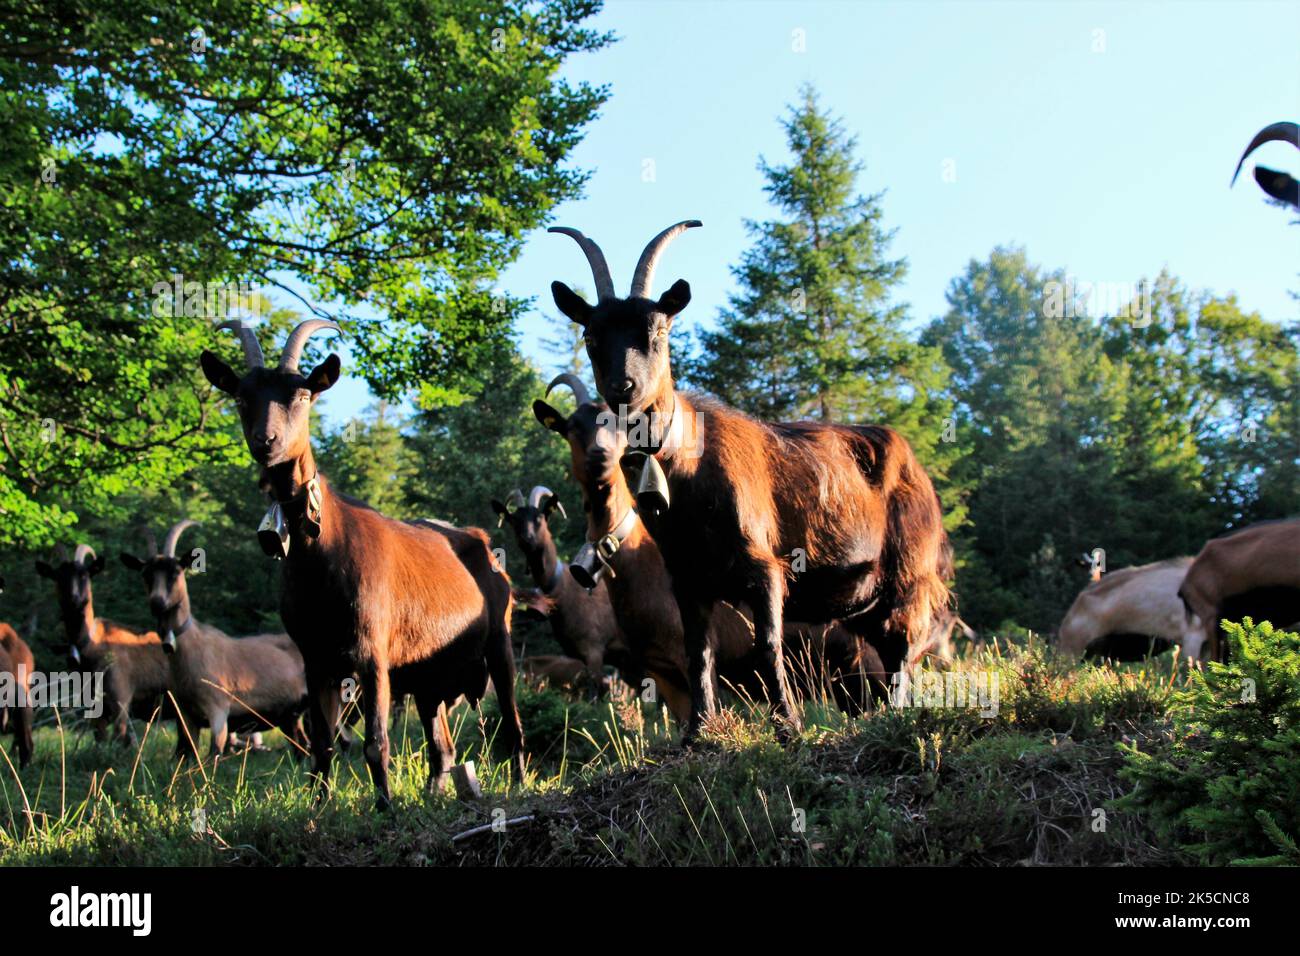 Goats on mountain meadow, herd of goats, grazing, edge of forest, Germany, Bavaria, Upper Bavaria, bunch German noble goats Stock Photo